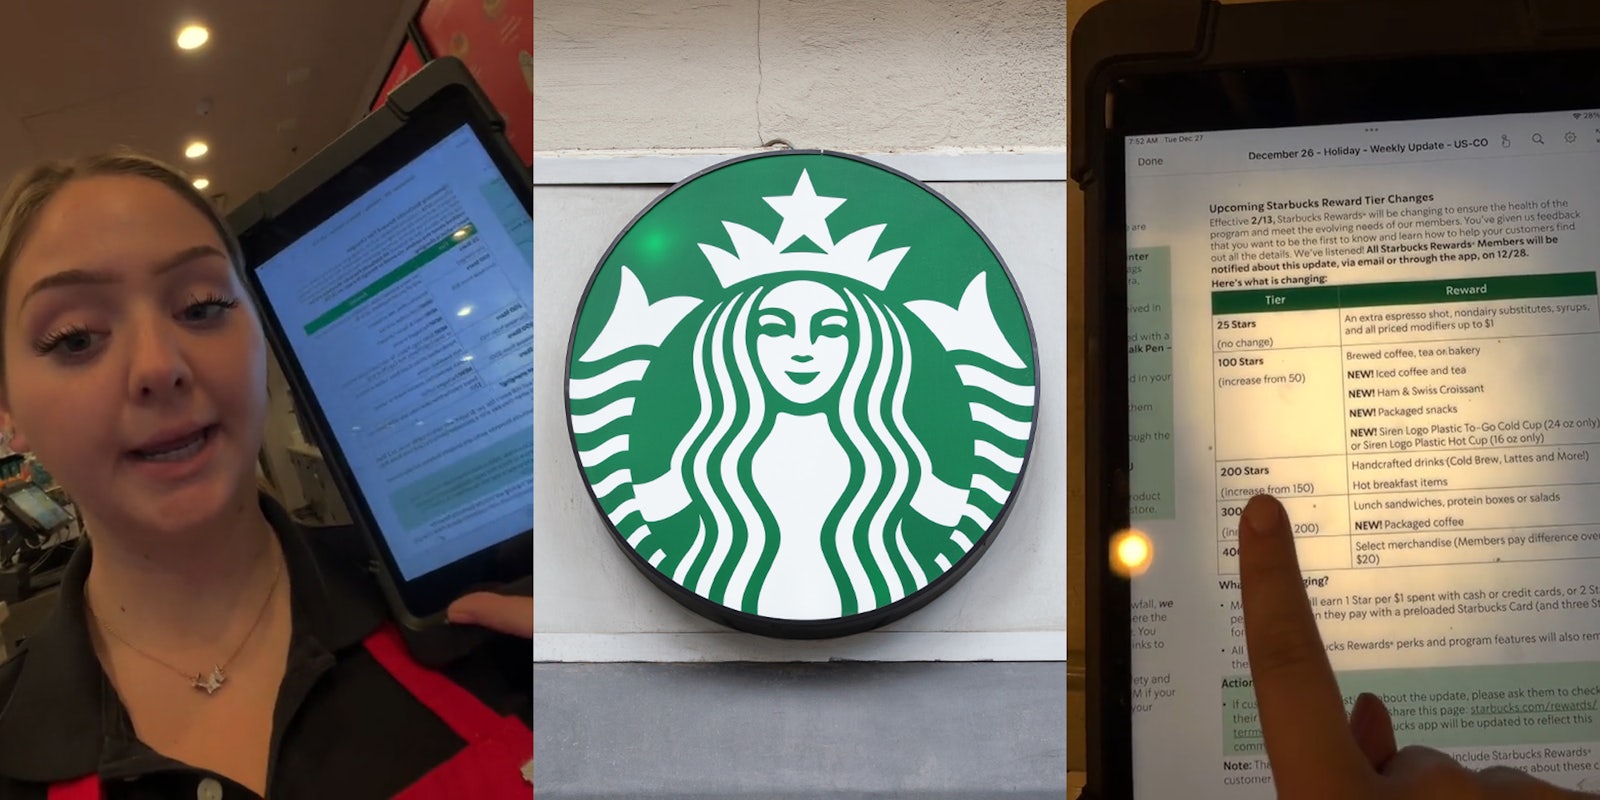 Starbucks barista speaking holding tablet (l) Starbucks circular sign on concrete wall (c) finger pointing to Starbucks rewards tiers on tablet (r)